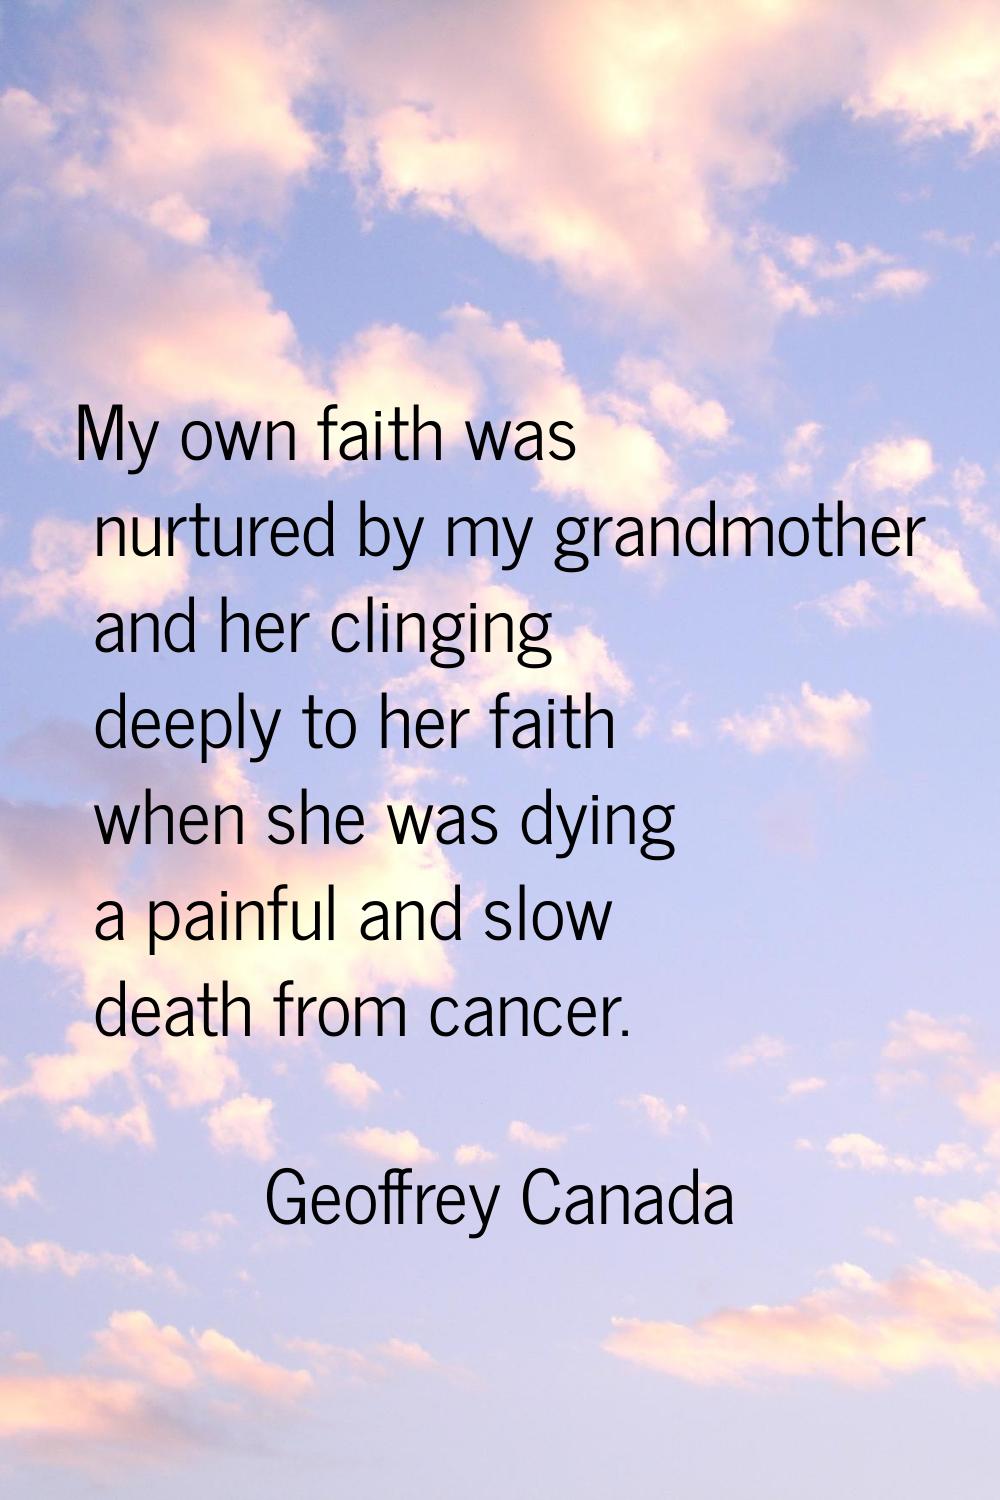 My own faith was nurtured by my grandmother and her clinging deeply to her faith when she was dying